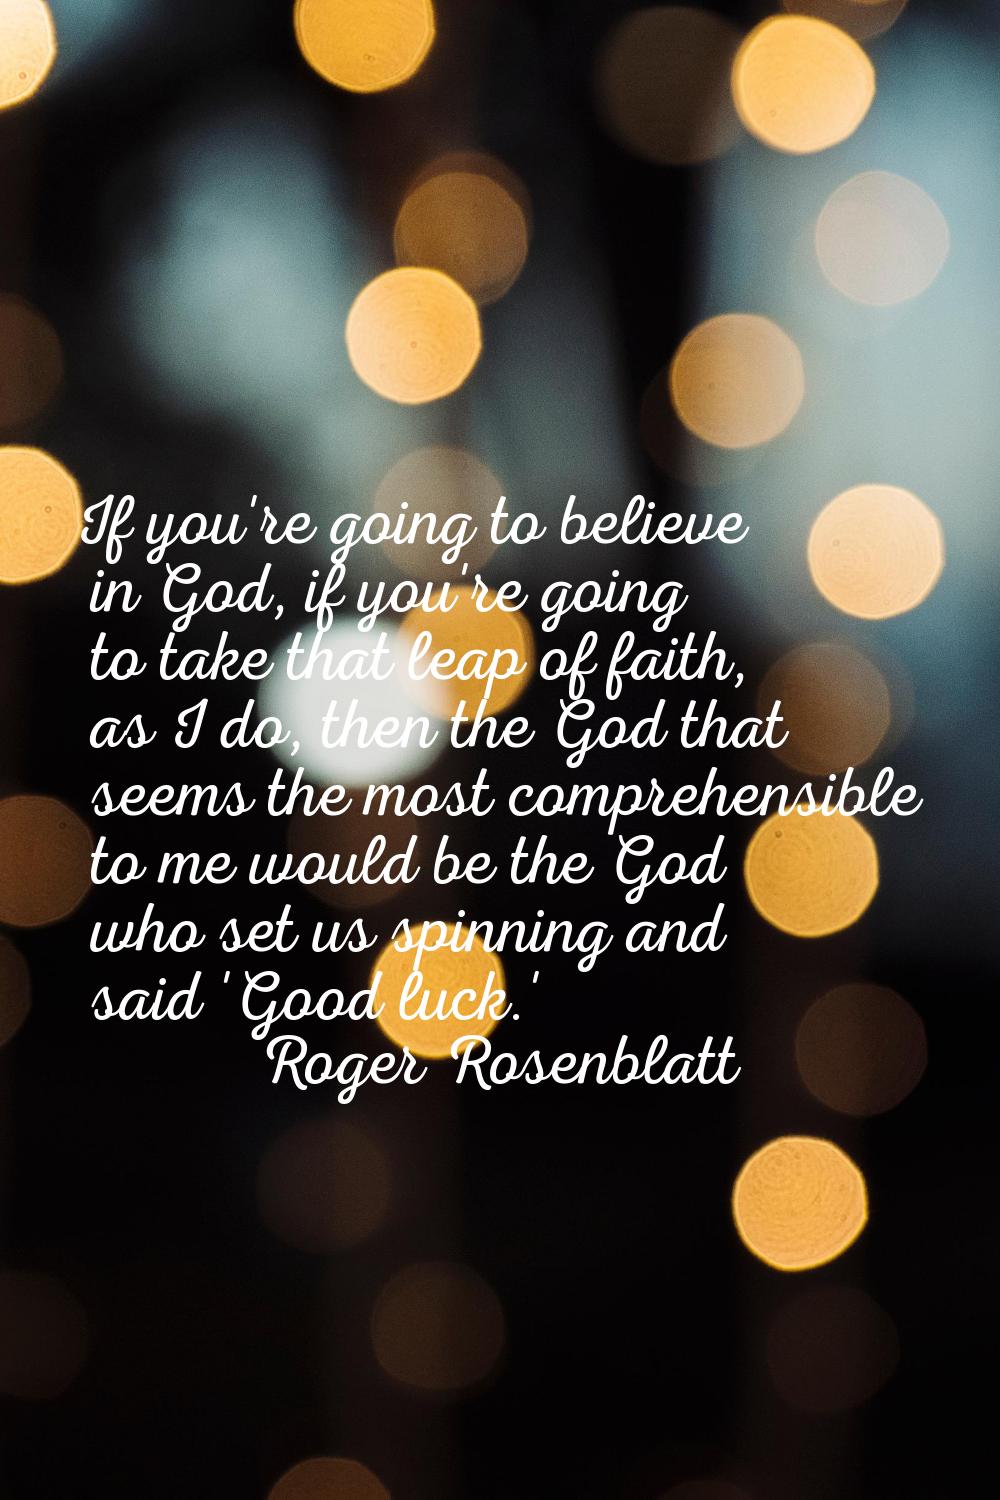 If you're going to believe in God, if you're going to take that leap of faith, as I do, then the Go